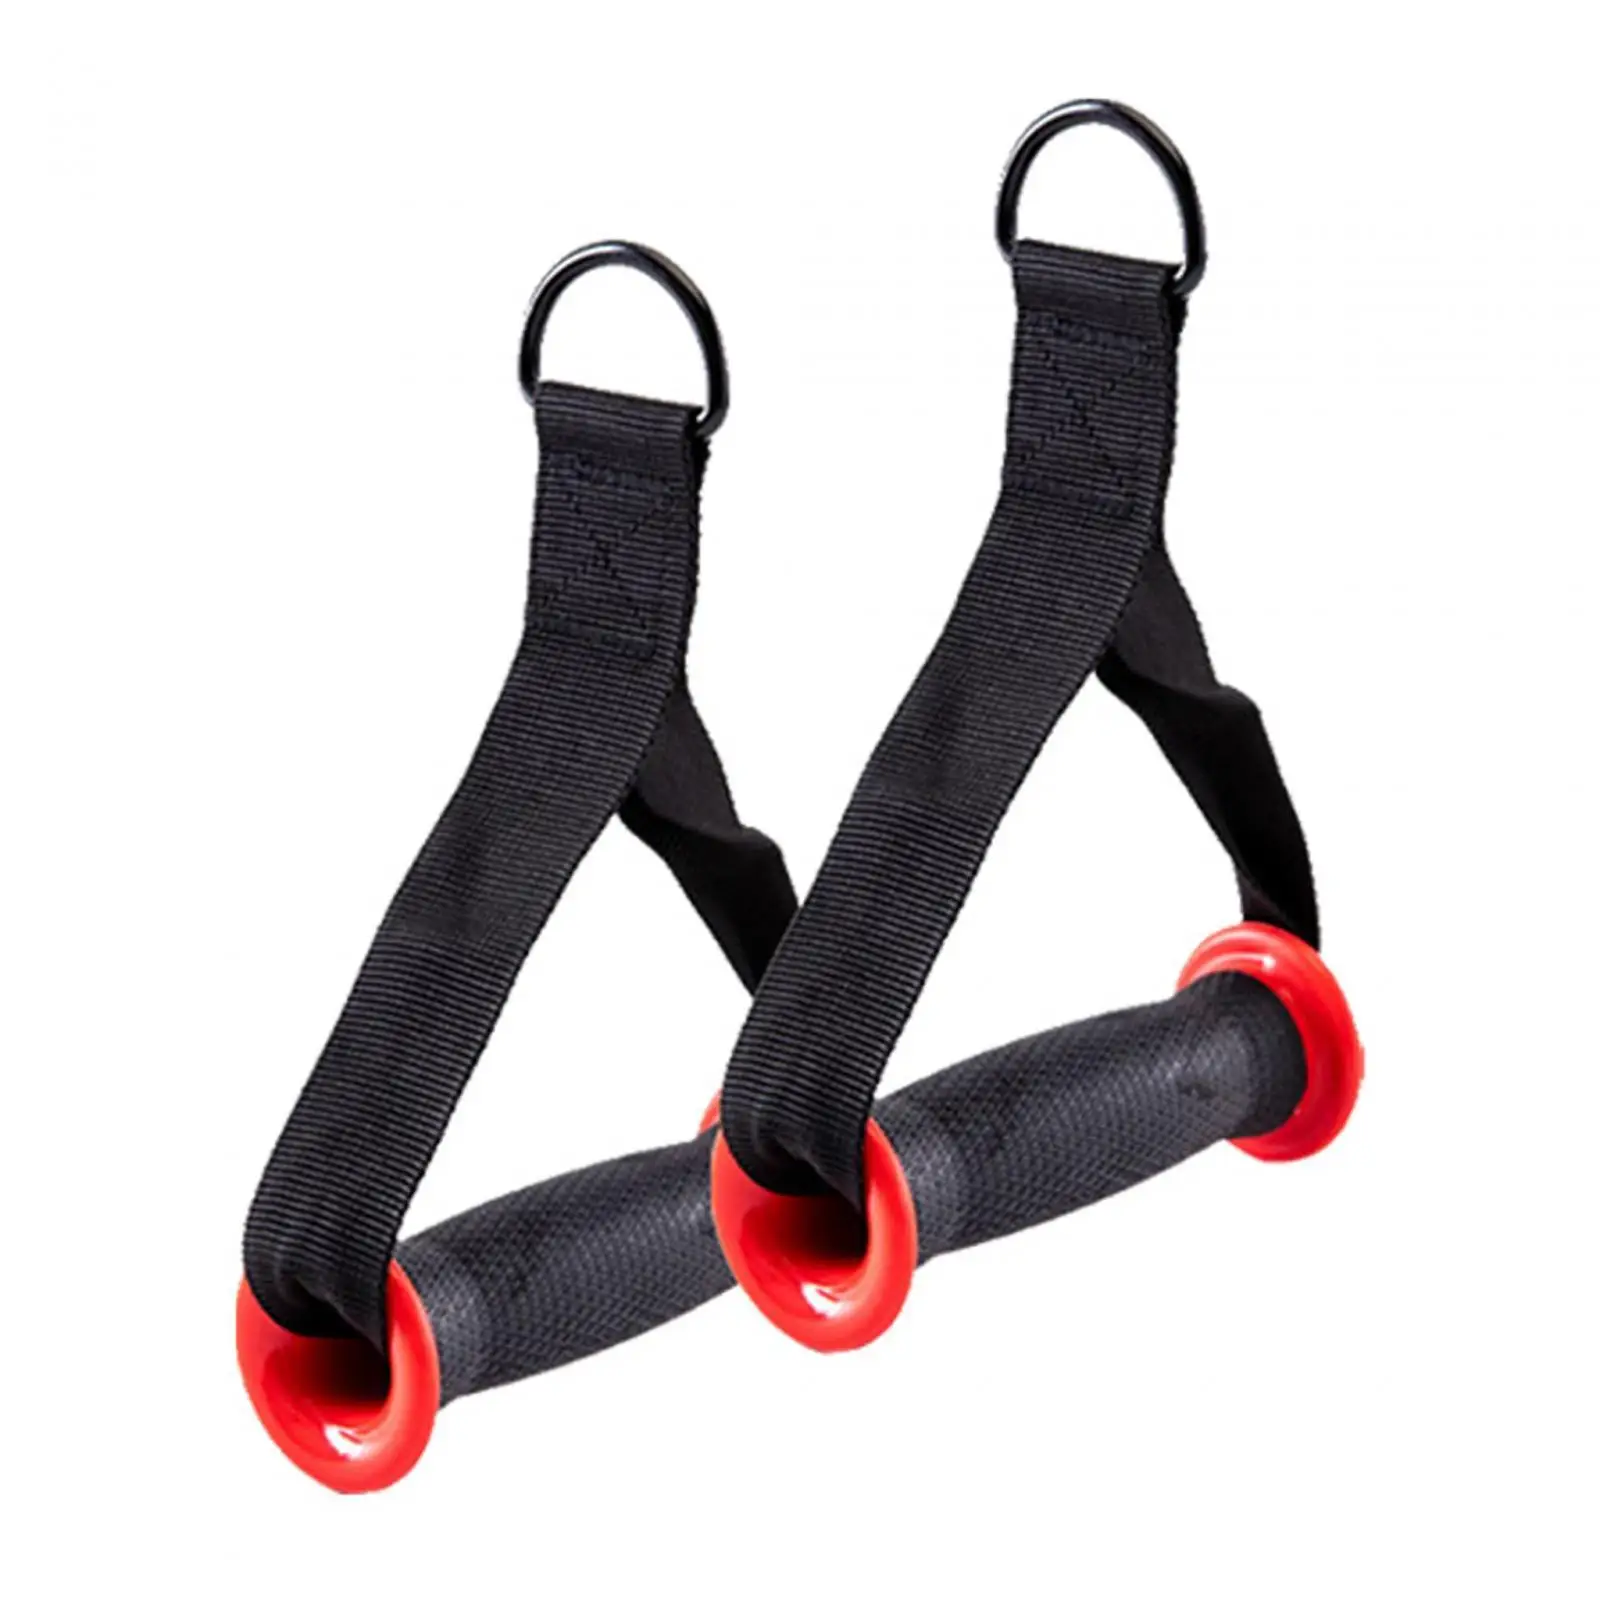 2x Cable Machine Attachment Handles Push Pull Body Fitness Ab Workout Heavy Duty Cable Attachment Tricep Rope Press Handles